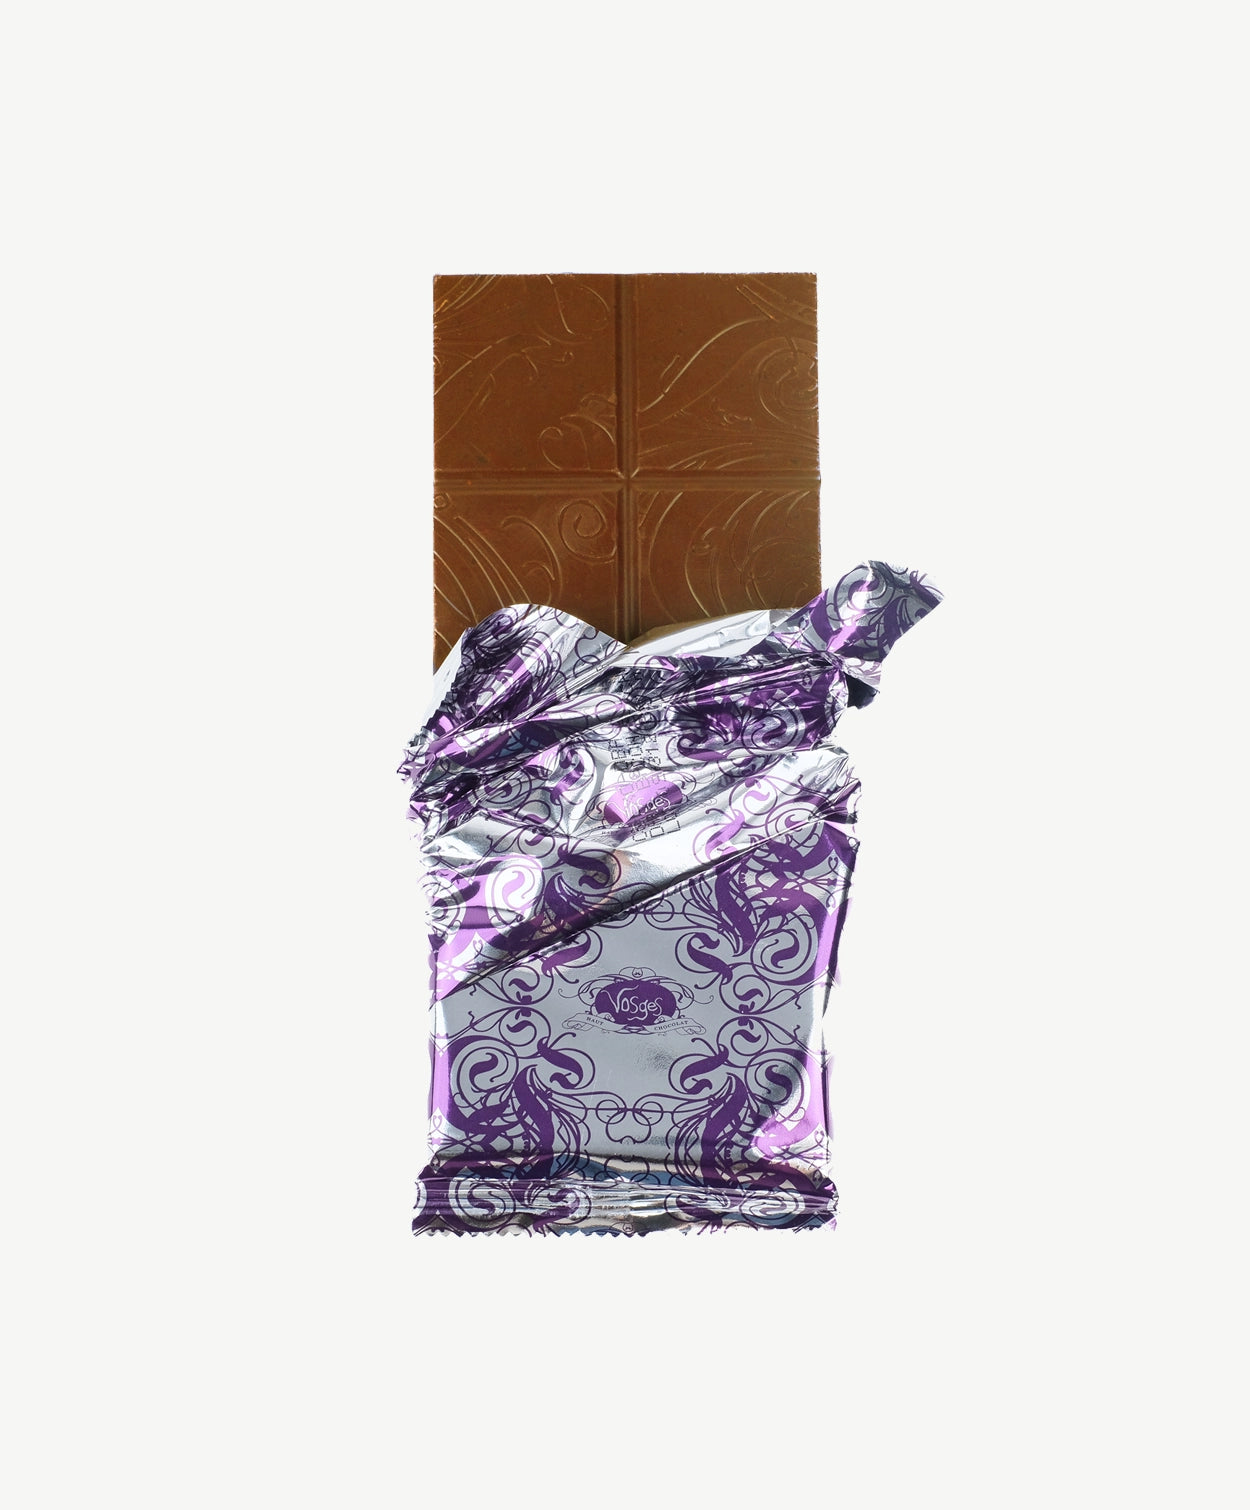 Vosges Turmeric Ginger Chocolate bar unwrapped stands upright on a white background.